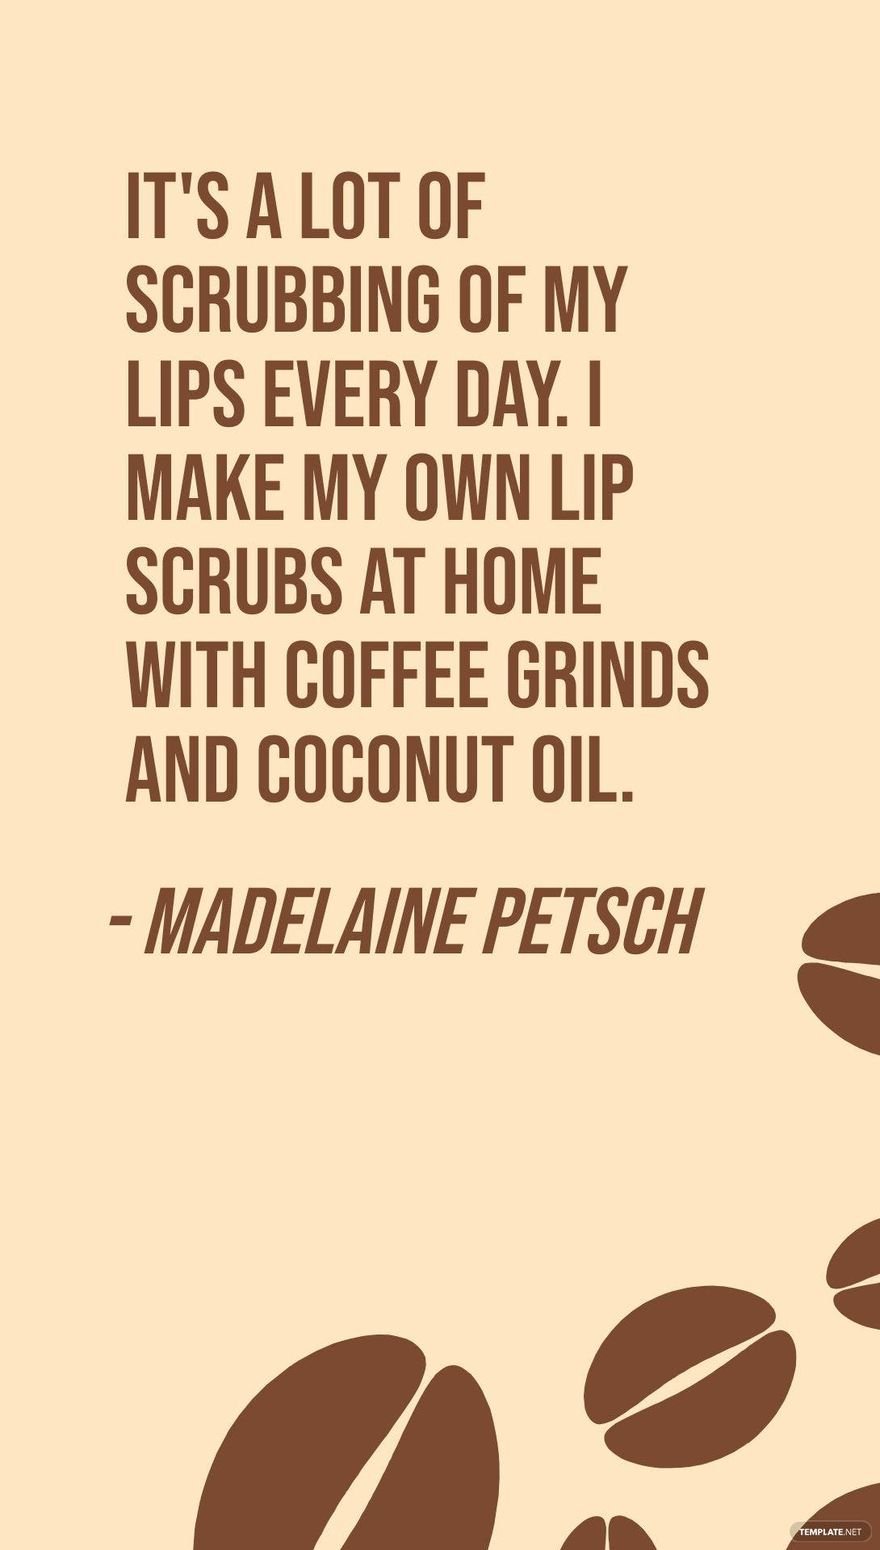 Madelaine Petsch - It's a lot of scrubbing of my lips every day. I make my own lip scrubs at home with coffee grinds and coconut oil. in JPG